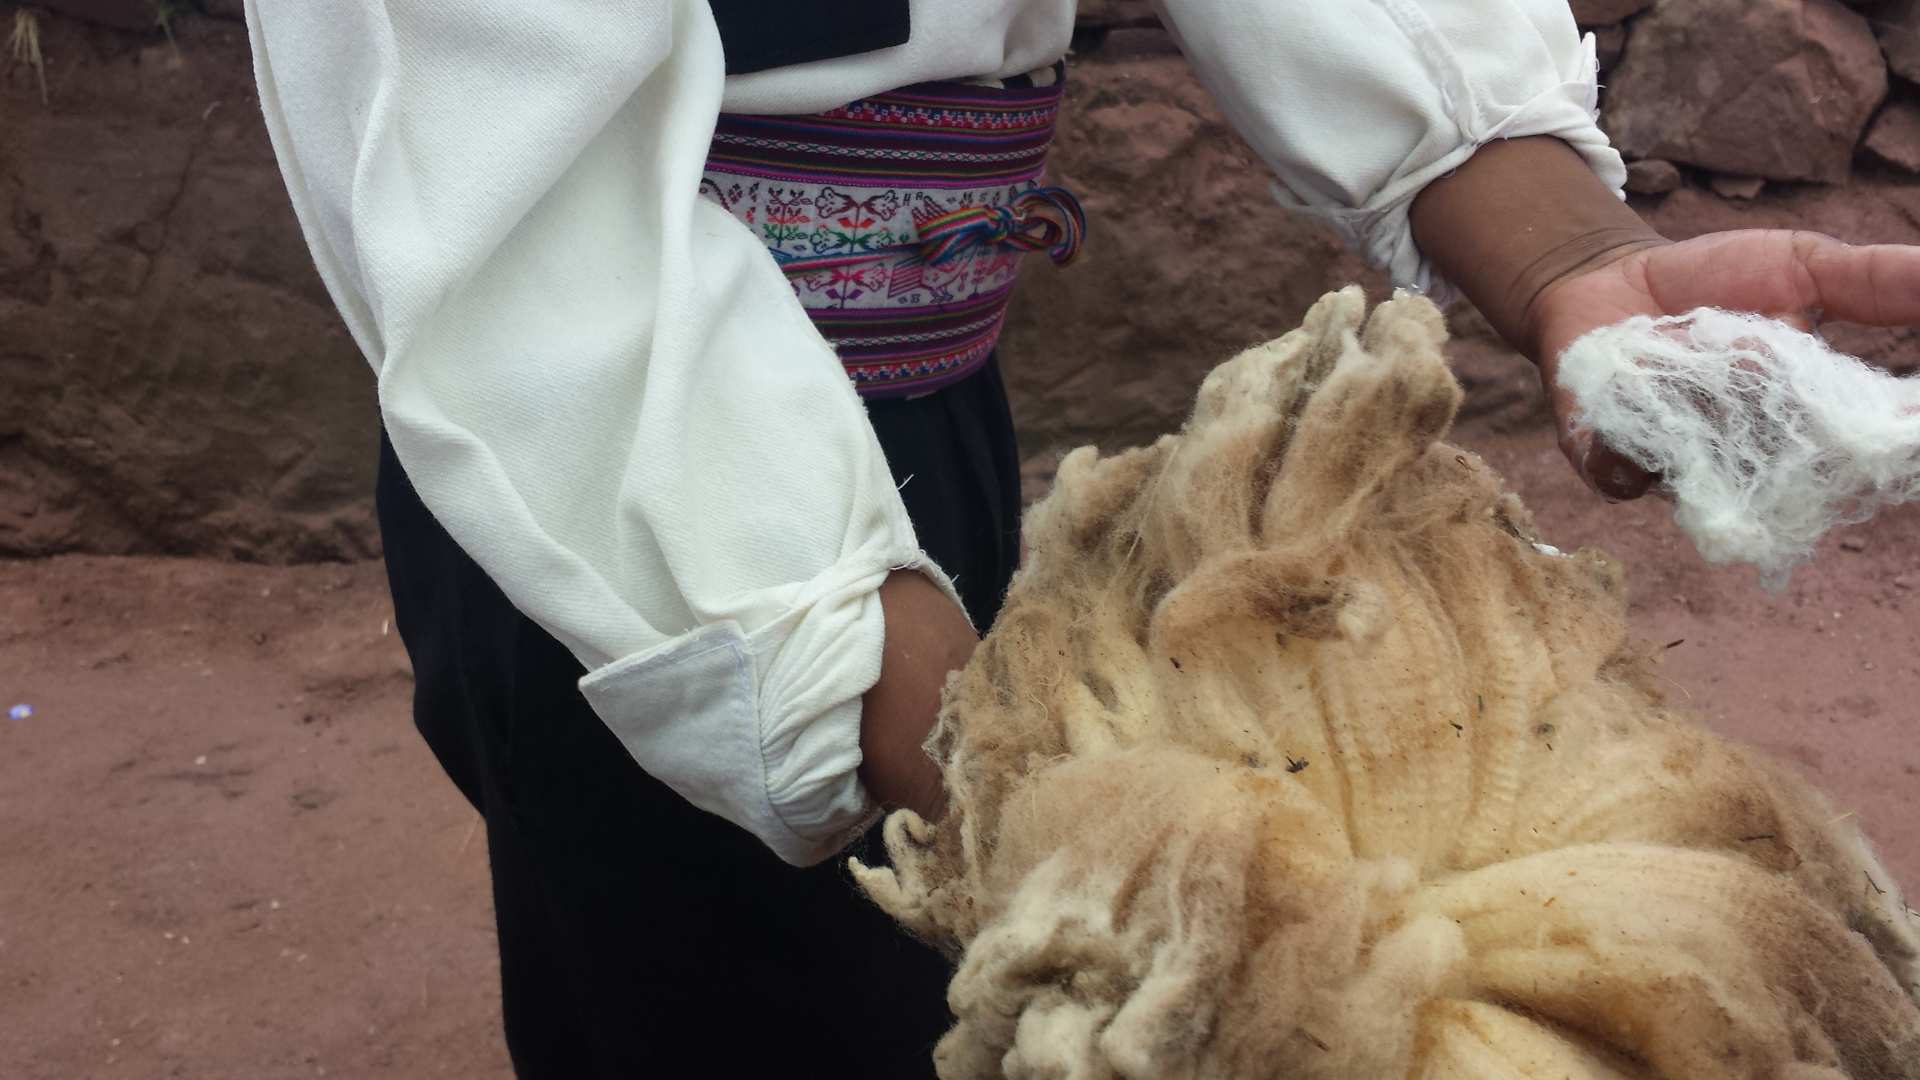 https://infromtheoutpost.com Andean sheep shearing at Lake Titicaca, Peru (A Bragagnini) https://infromtheoutpost.com